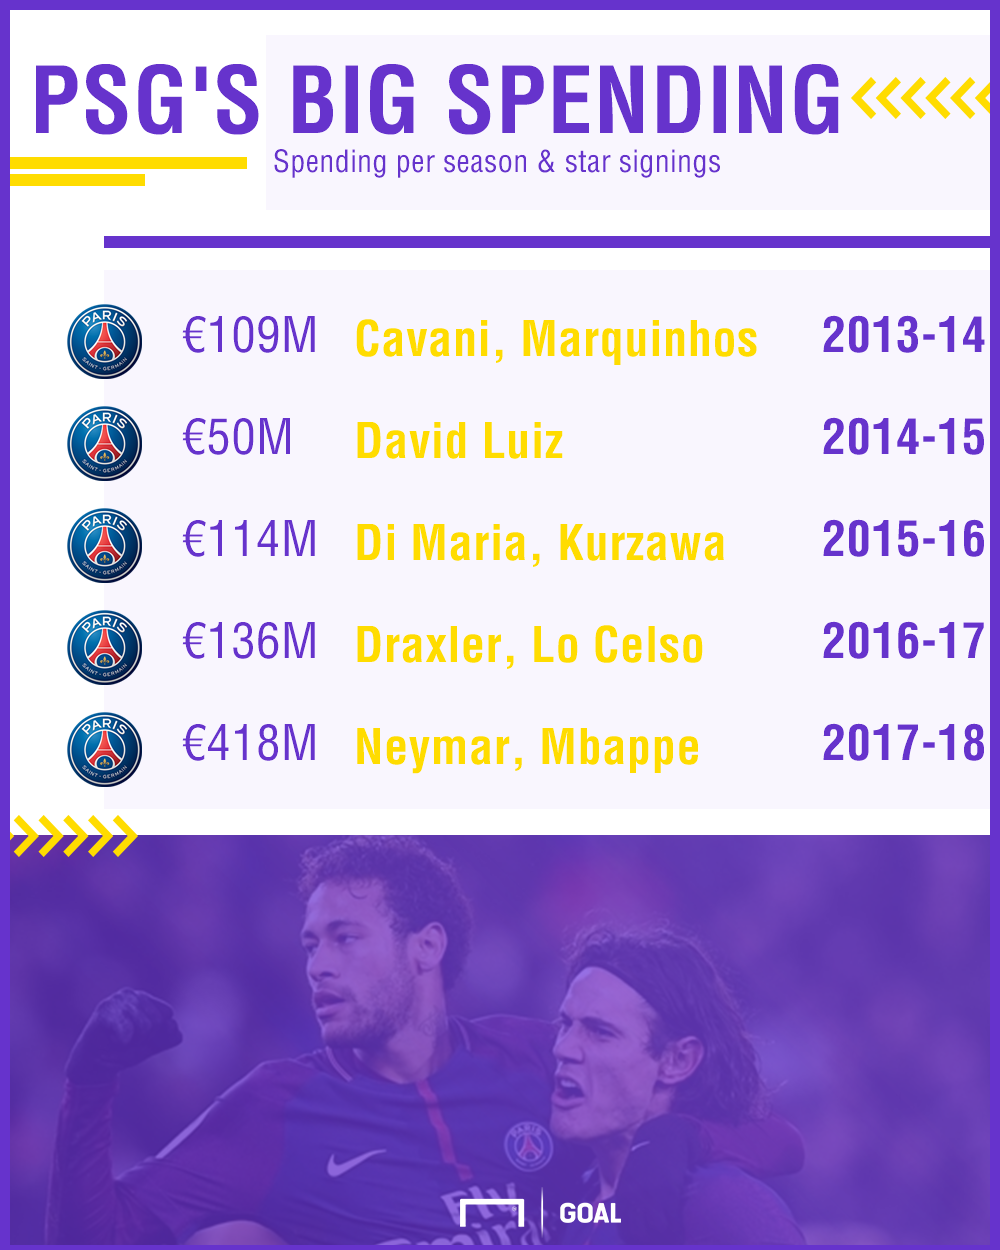 Over €1 billion on transfers and flops PSG are no closer to Champions